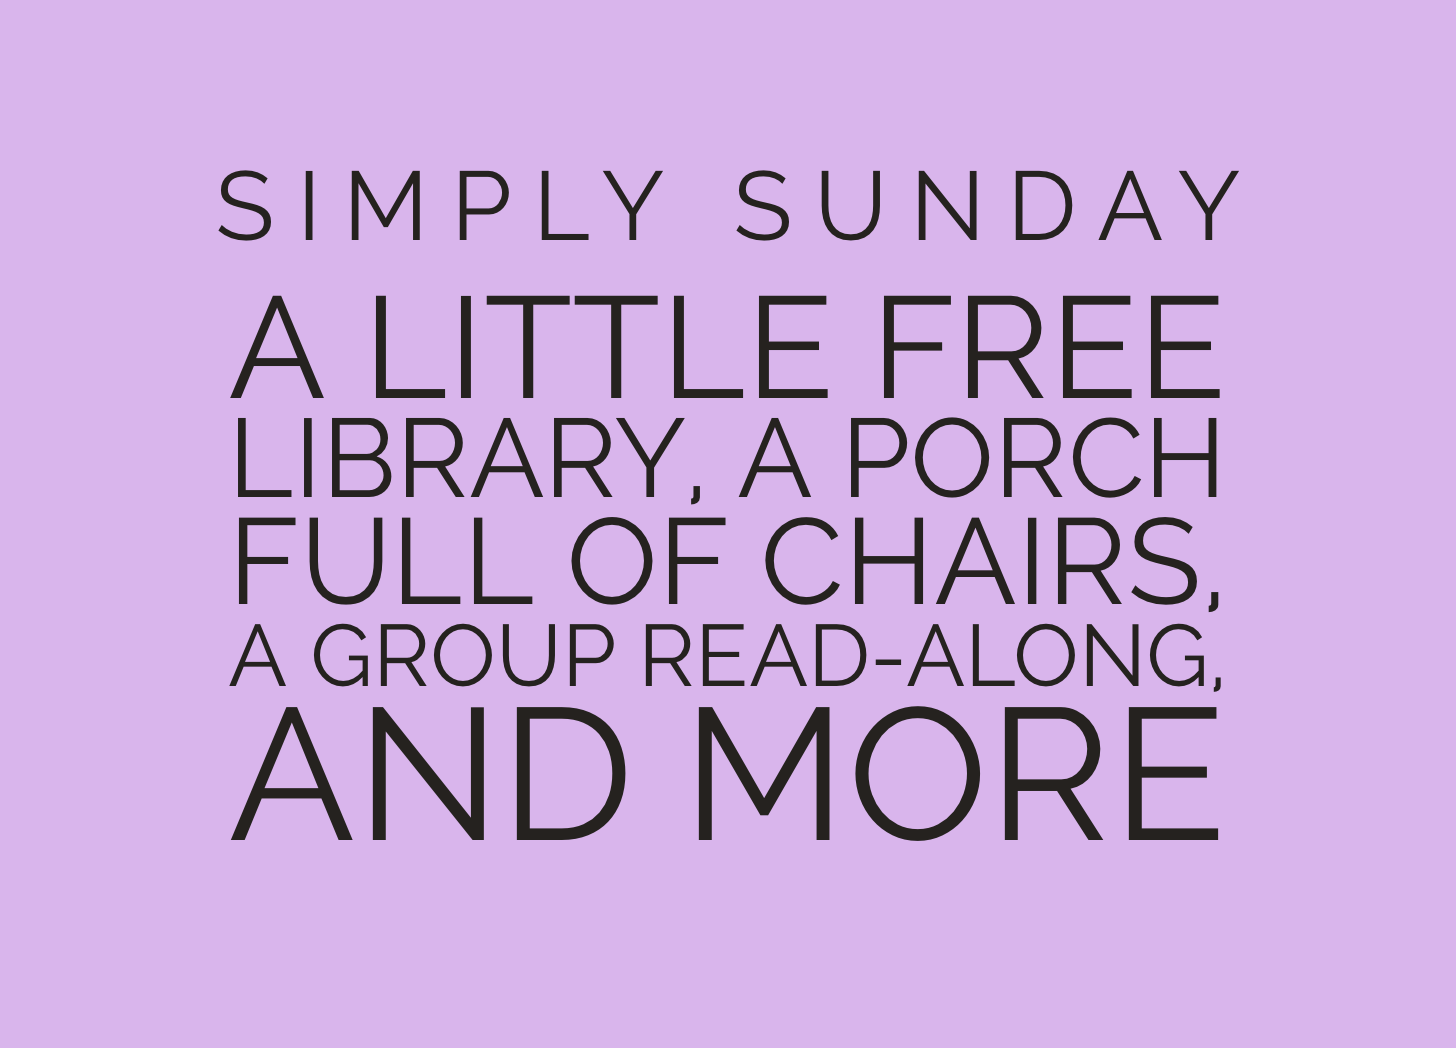 Simply Sunday - a little free library, a porch full of chairs, a group read-along, and more